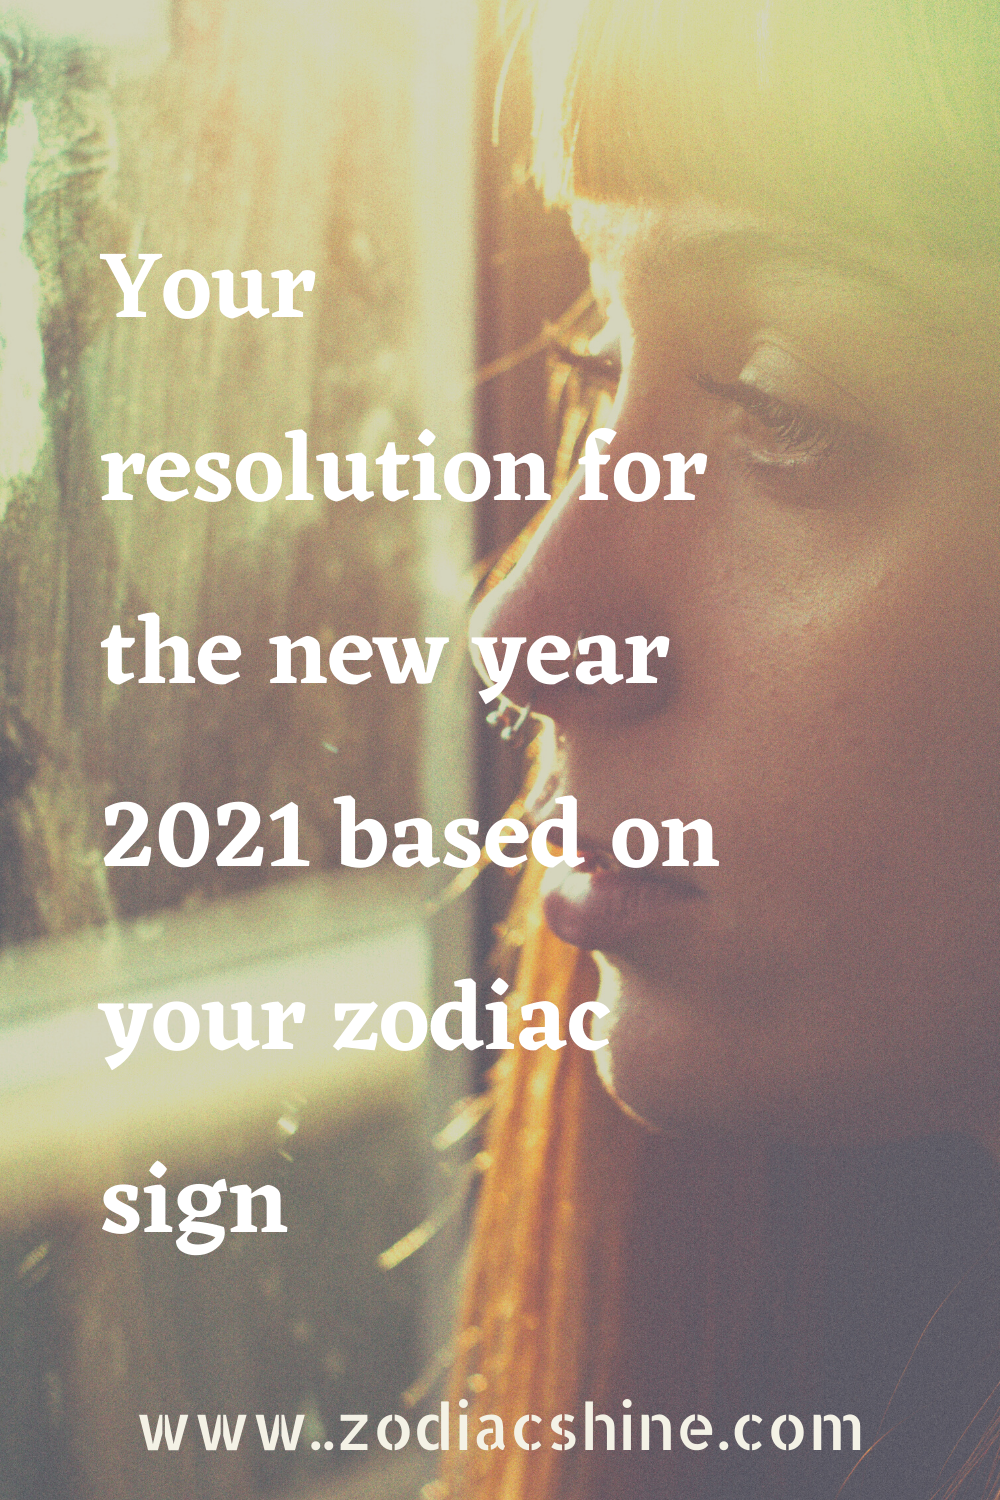 Your resolution for the new year 2021 based on your zodiac sign